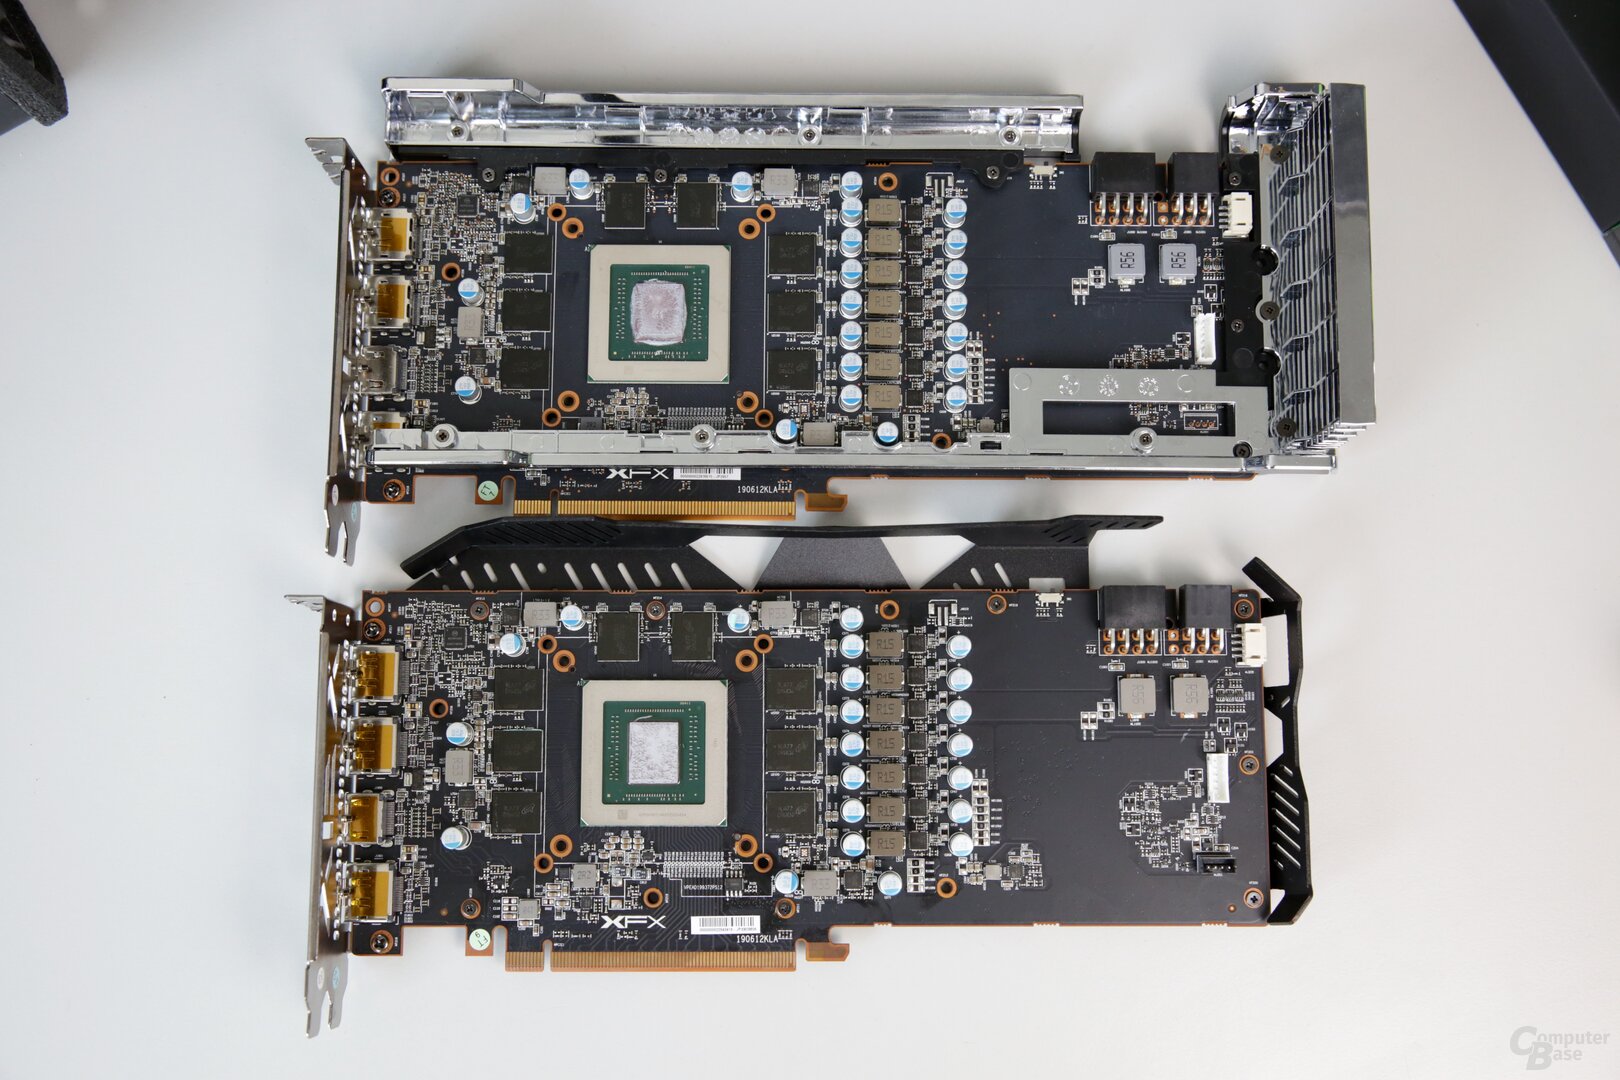 The PCB of RAW2 (below) and THICC2 (above) is almost identical